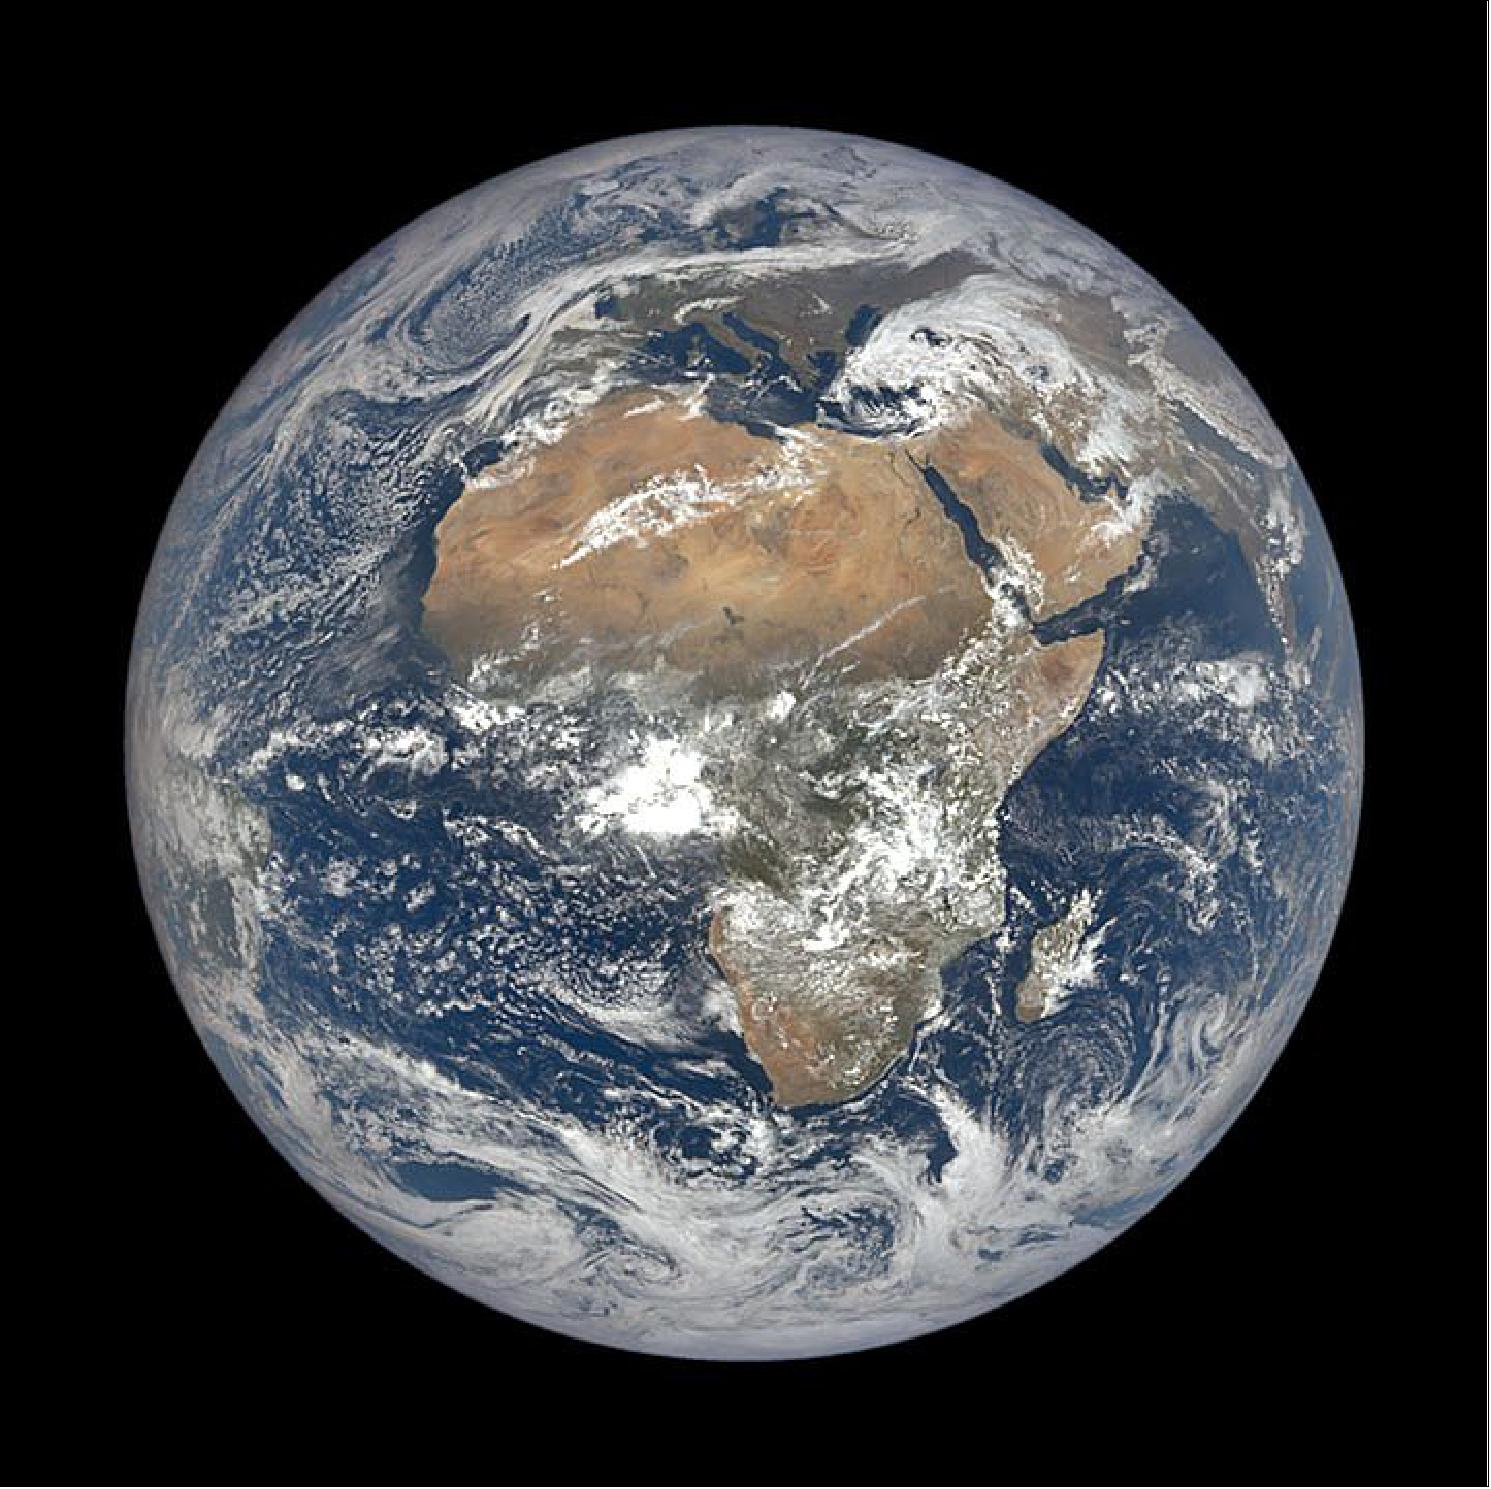 Figure 18: It means that the satellite’s EPIC (Earth Polychromatic Imaging Camera) is once again taking beautiful full-disk images of our home several times each day. NASA’s EPIC instrument acquired the image of Africa and Europe on March 19, 2020 (image credit: NASA Earth Observatory, Adam Voiland)